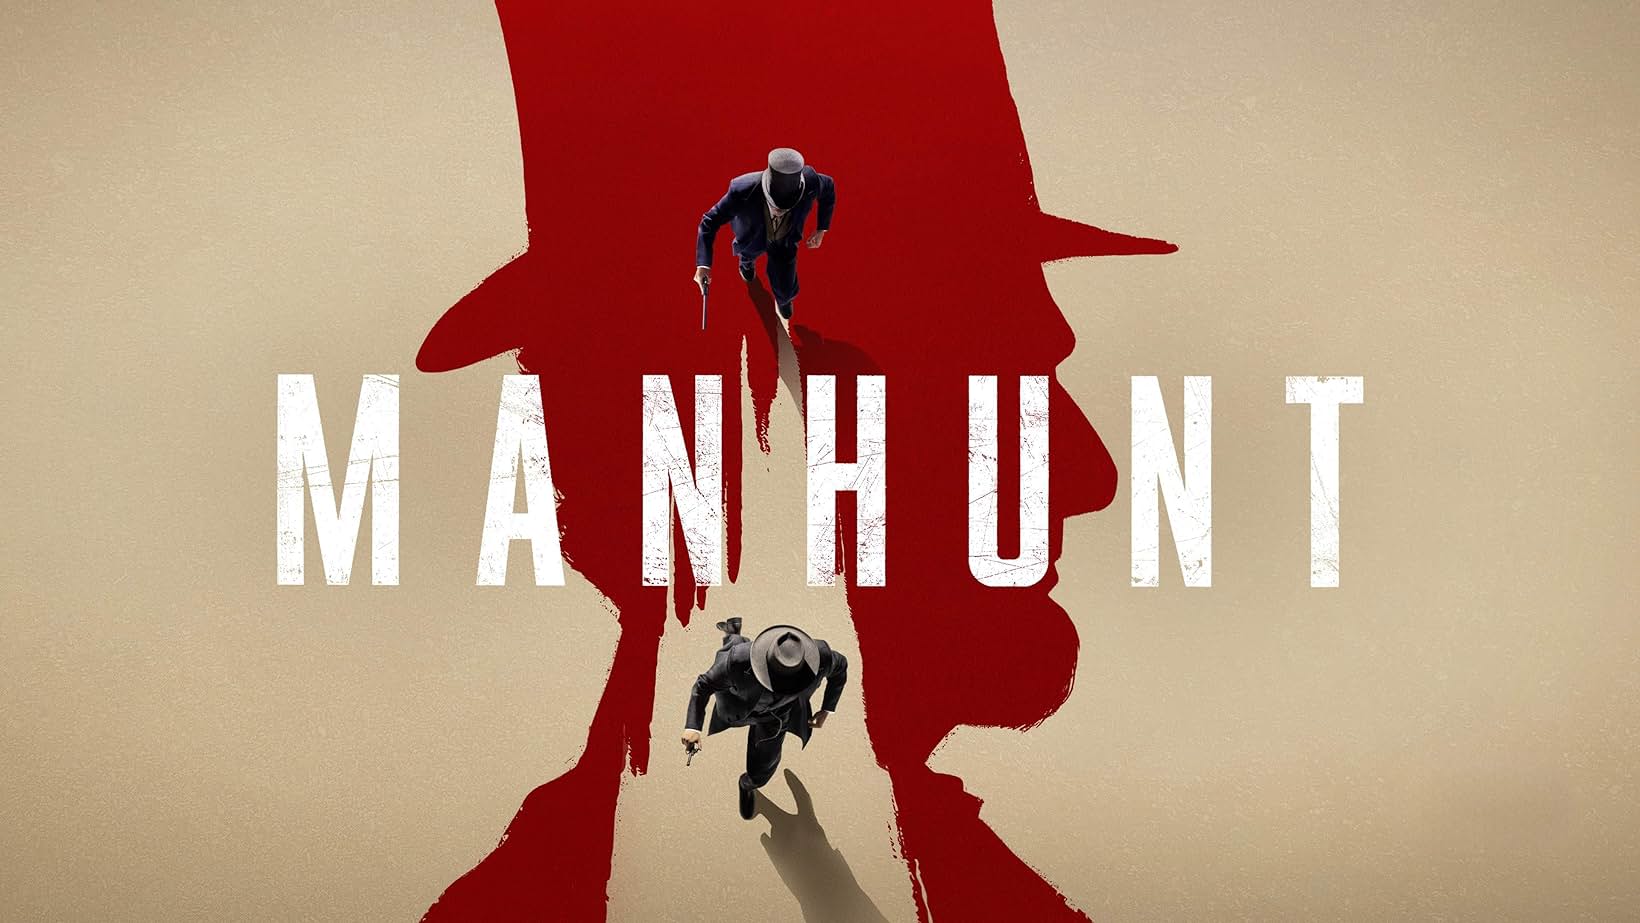 Genre: Conspiracy thriller, and Historical drama, and Created by Monica Beletsky, and Based on "Manhunt: The 12-Day Chase for Lincoln's Killer" by James L. Swanson, with Showrunner: Monica Beletsky, and Directed by Carl Franklin, John Dahl, and Eva Sørhaug, Starring: Tobias Menzies, Anthony Boyle, Lovie Simone, Will Harrison, Brandon Flynn, Damian O'Hare, Glenn Morshower, Patton Oswalt, Matt Walsh, Hamish Linklater, with Opening theme: "Egún" by Danielle Ponder, and Composer: Bryce Dessner, Country of origin: United States, Original language: English, No. of episodes: 7, with Executive producers: Monica Beletsky, Layne Eskridge, Kate Barry, James L. Swanson, Michael Rotenberg, Richard Abate, Frank Smith, Naia Cucukov, and Carl Franklin, with Production companies: POV Entertainment, Dovetale Productions, Monarch Pictures, Walden Media, 3 Arts Entertainment, Lionsgate Television, and Apple Studios, and Original Network: Apple TV+ (2024)